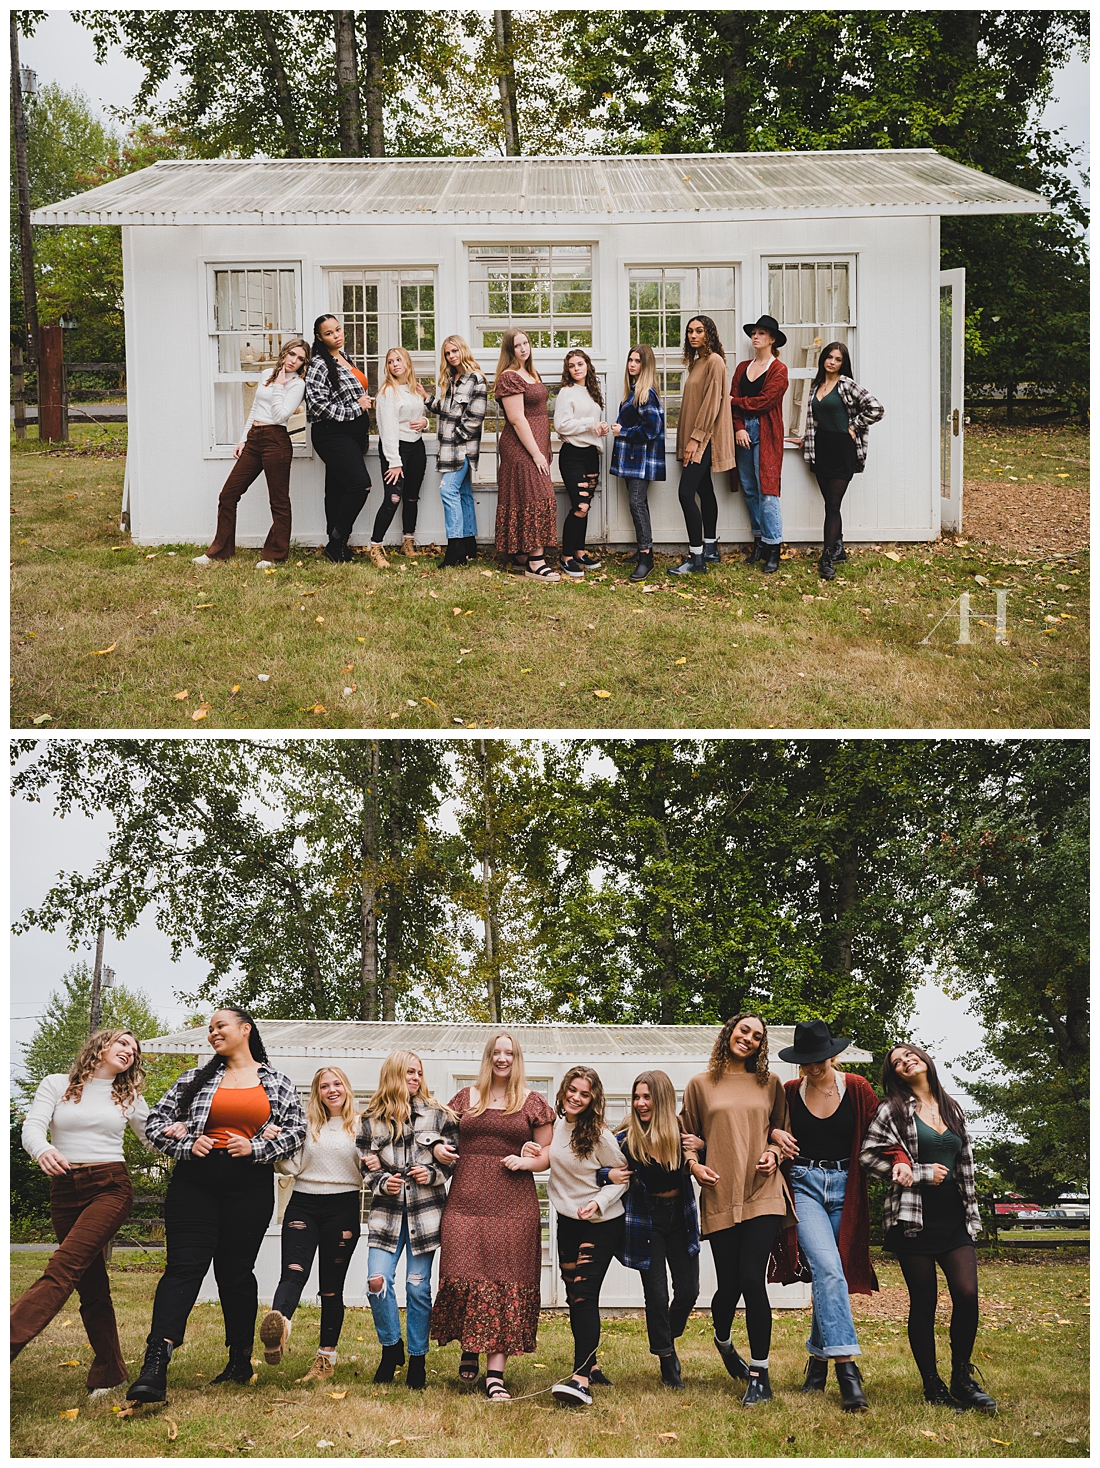 Fall-Themed Portraits at Wild Hearts Farm | What to Wear for Fall Senior Portraits, How to Style a Fall PNW Portrait Session | Photographed by the Best Tacoma Senior Portrait Photographer Amanda Howse Photography